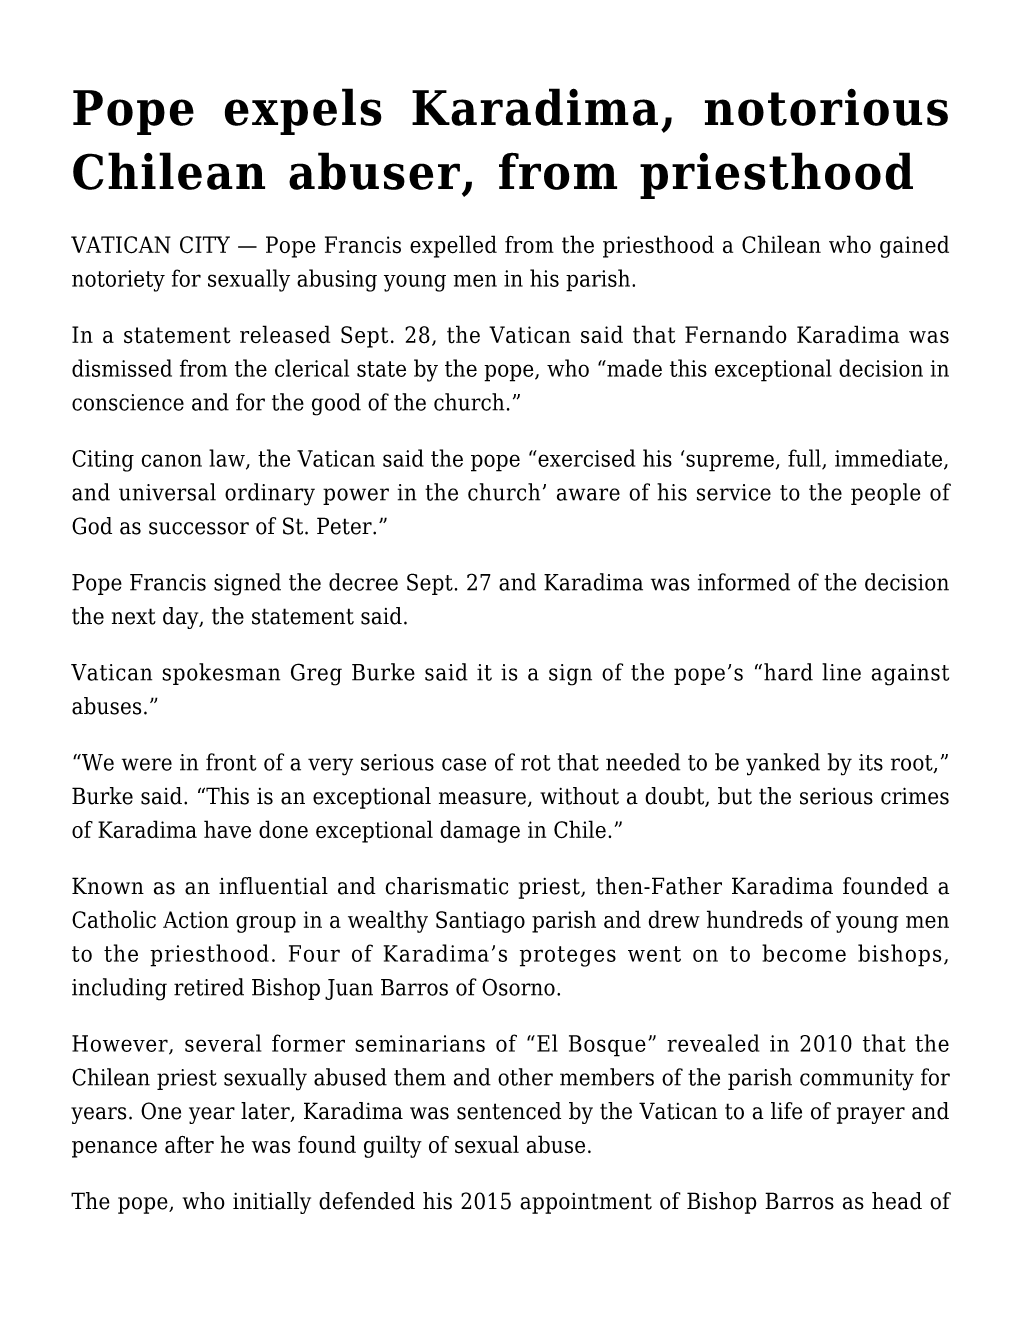 Pope Expels Karadima, Notorious Chilean Abuser, from Priesthood